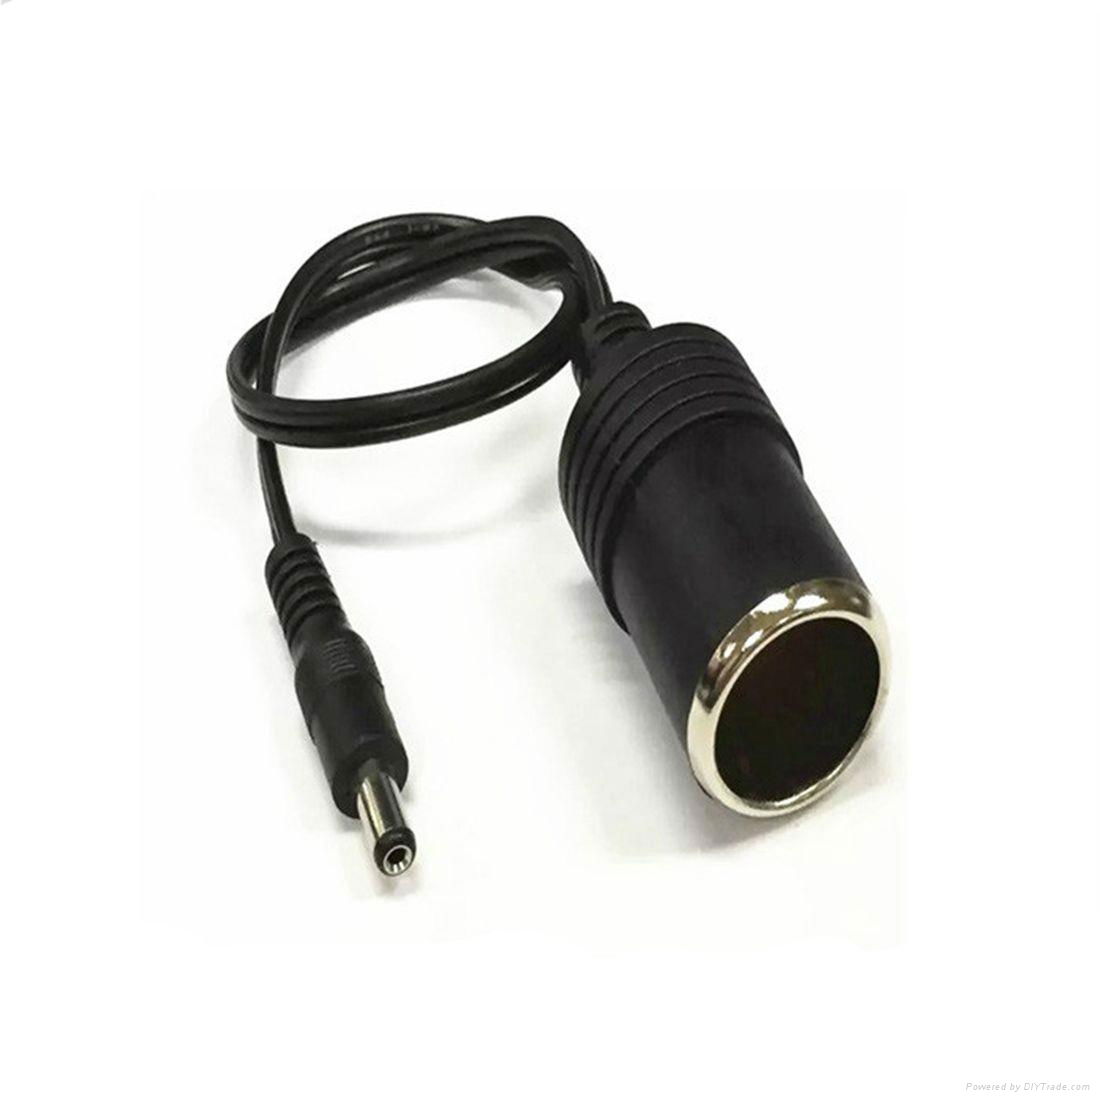 CFTW 12V 10A DC 5.5mm x 2.1mm Car Cigarette Lighter Power Supply Adapter Cable